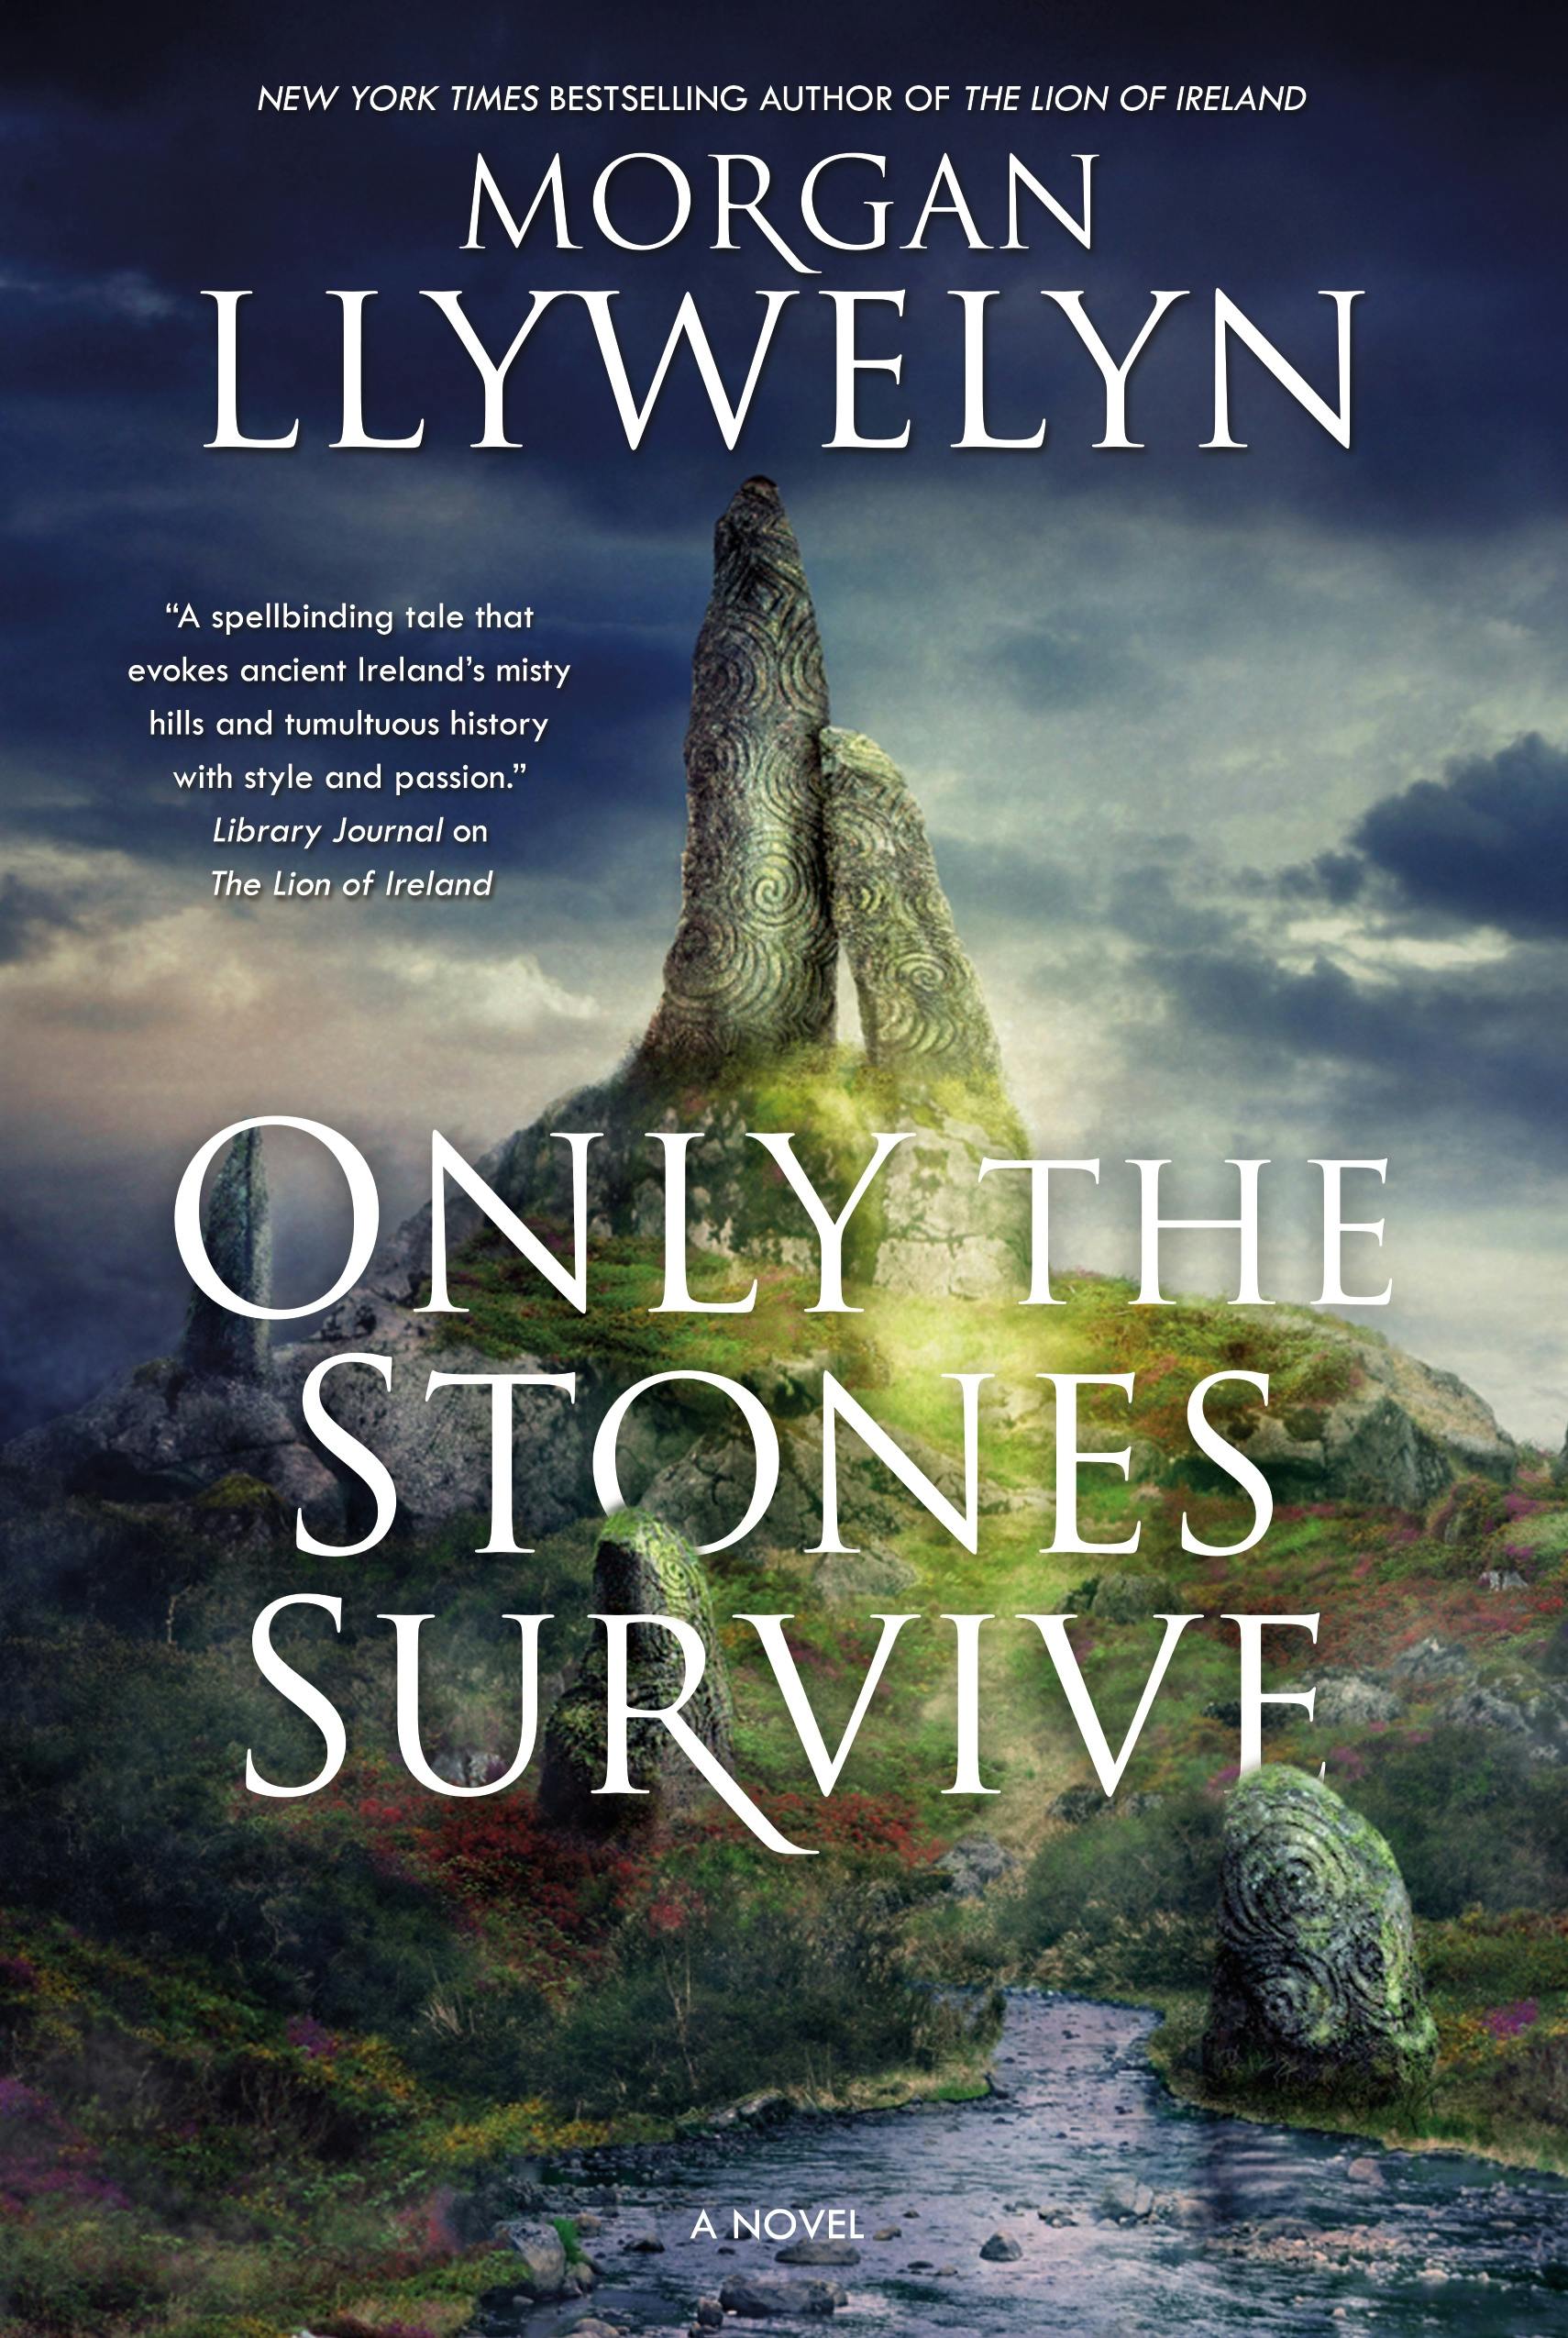 Cover for the book titled as: Only the Stones Survive